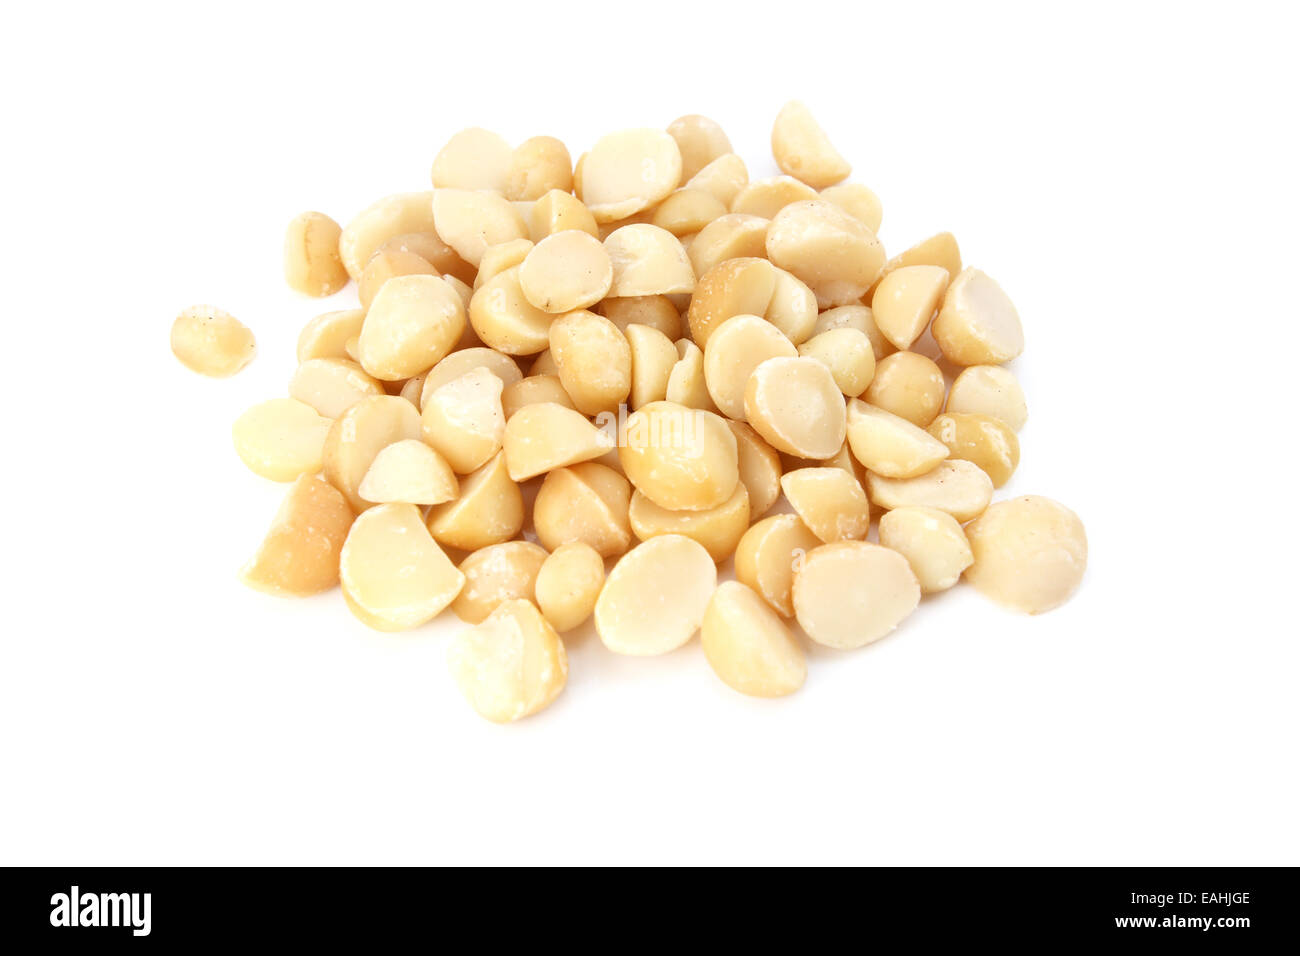 Macadamia nuts, isolated on a white background Stock Photo